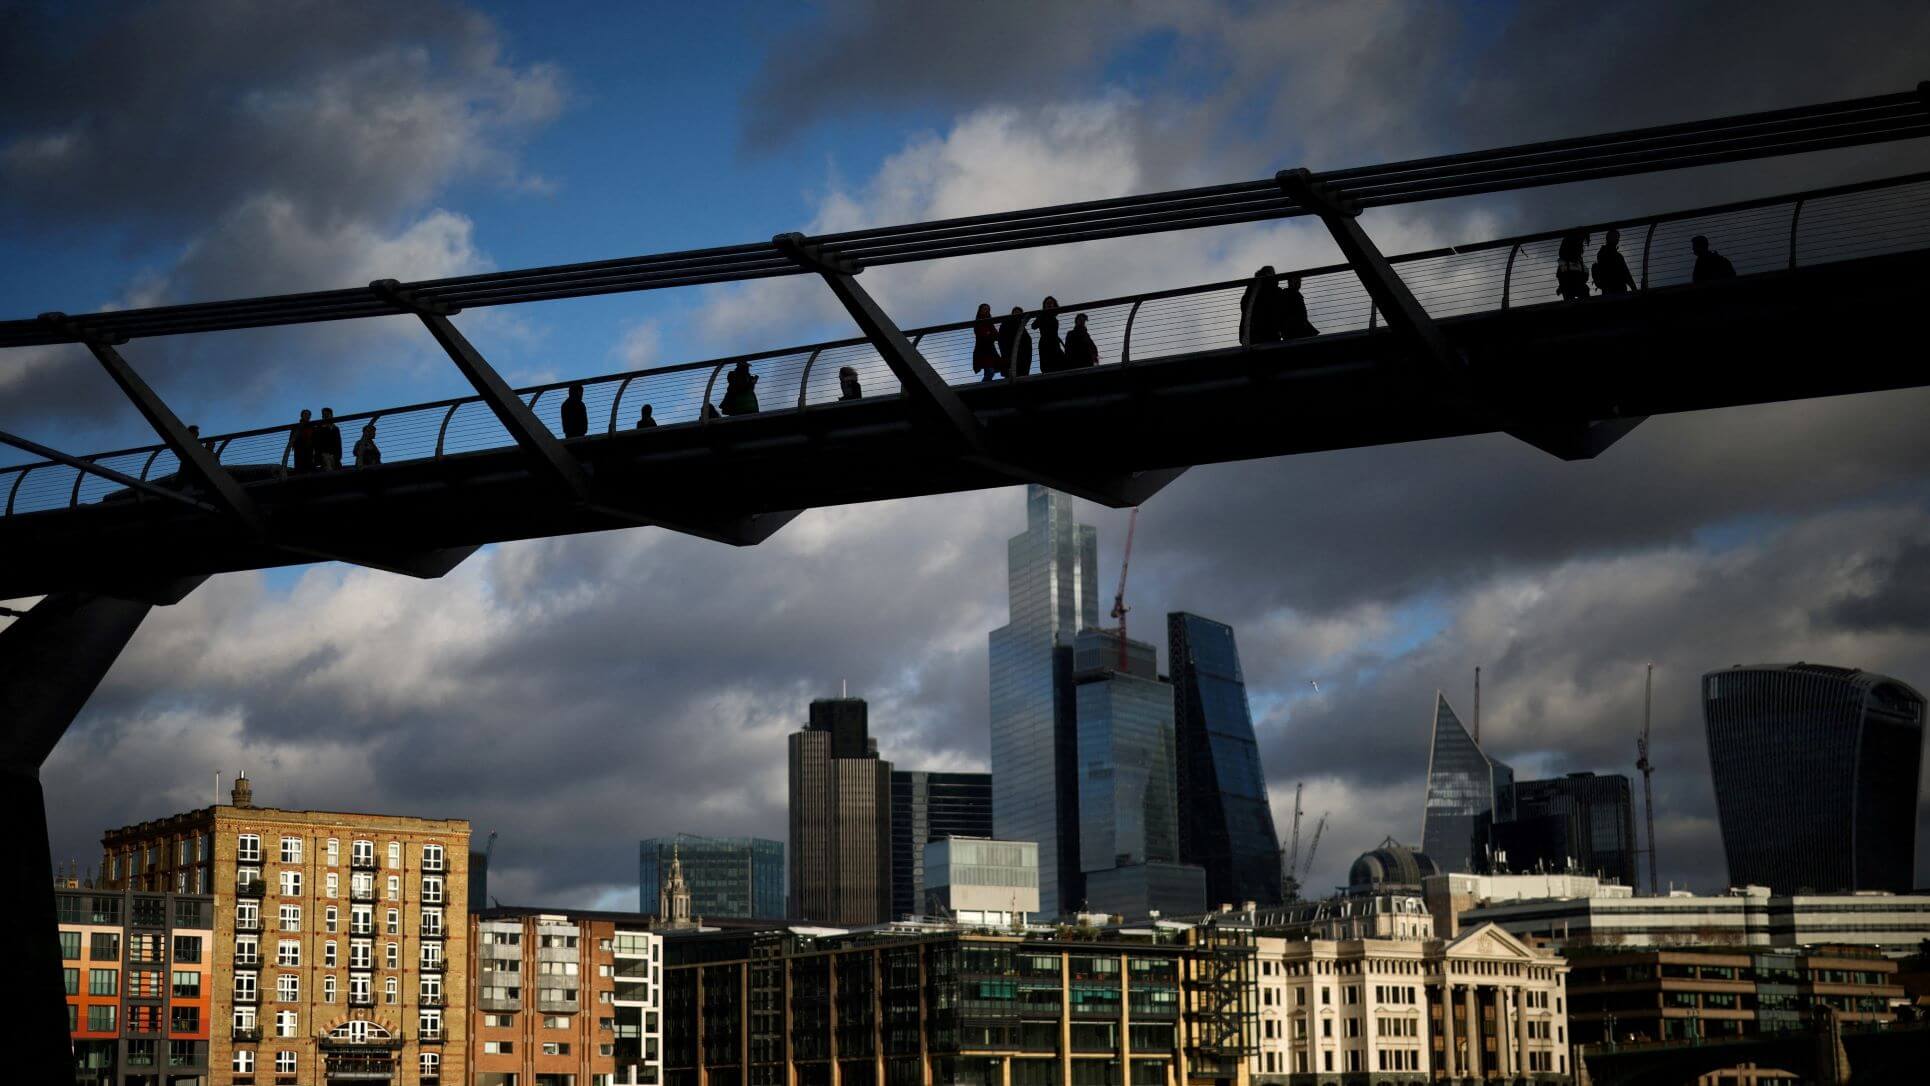 UK Economic Forecaster To Downgrade Medium-Term Growth Outlook - Times